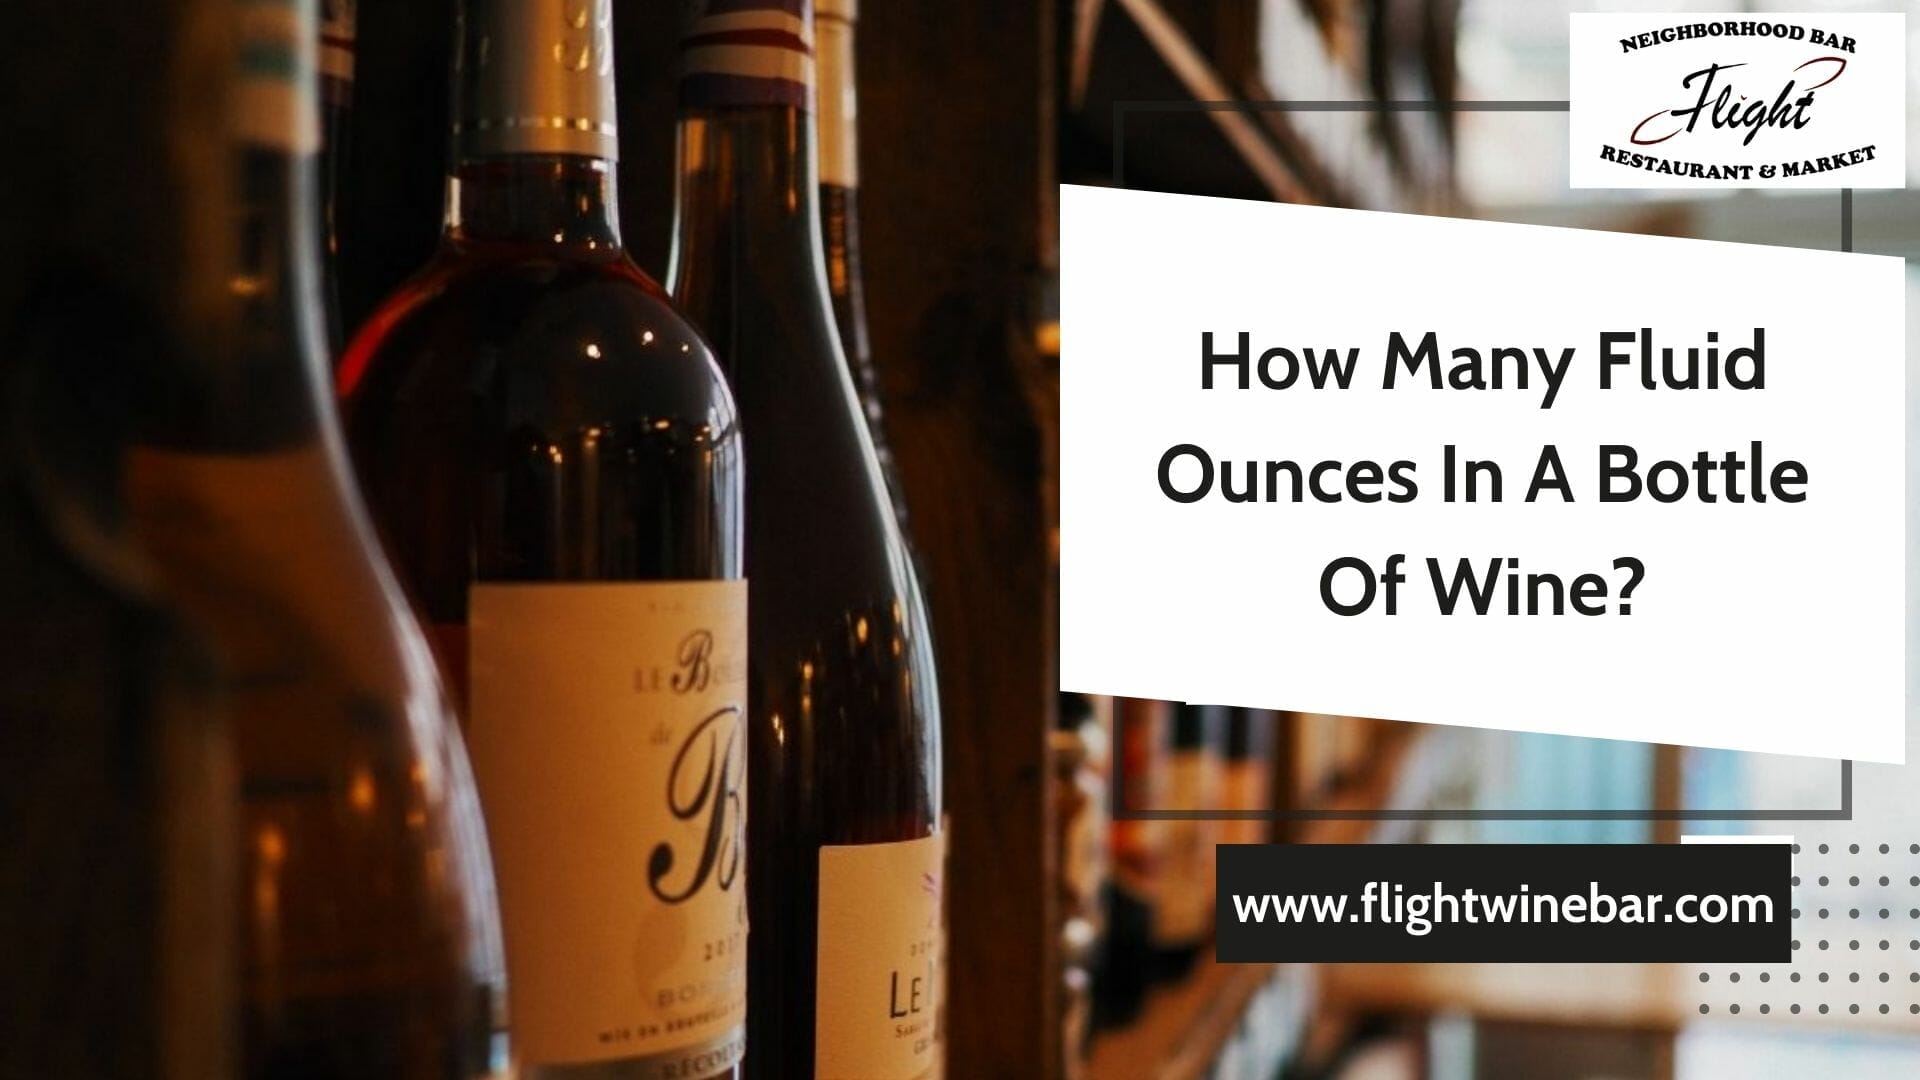 How Many Fluid Ounces In A Bottle Of Wine